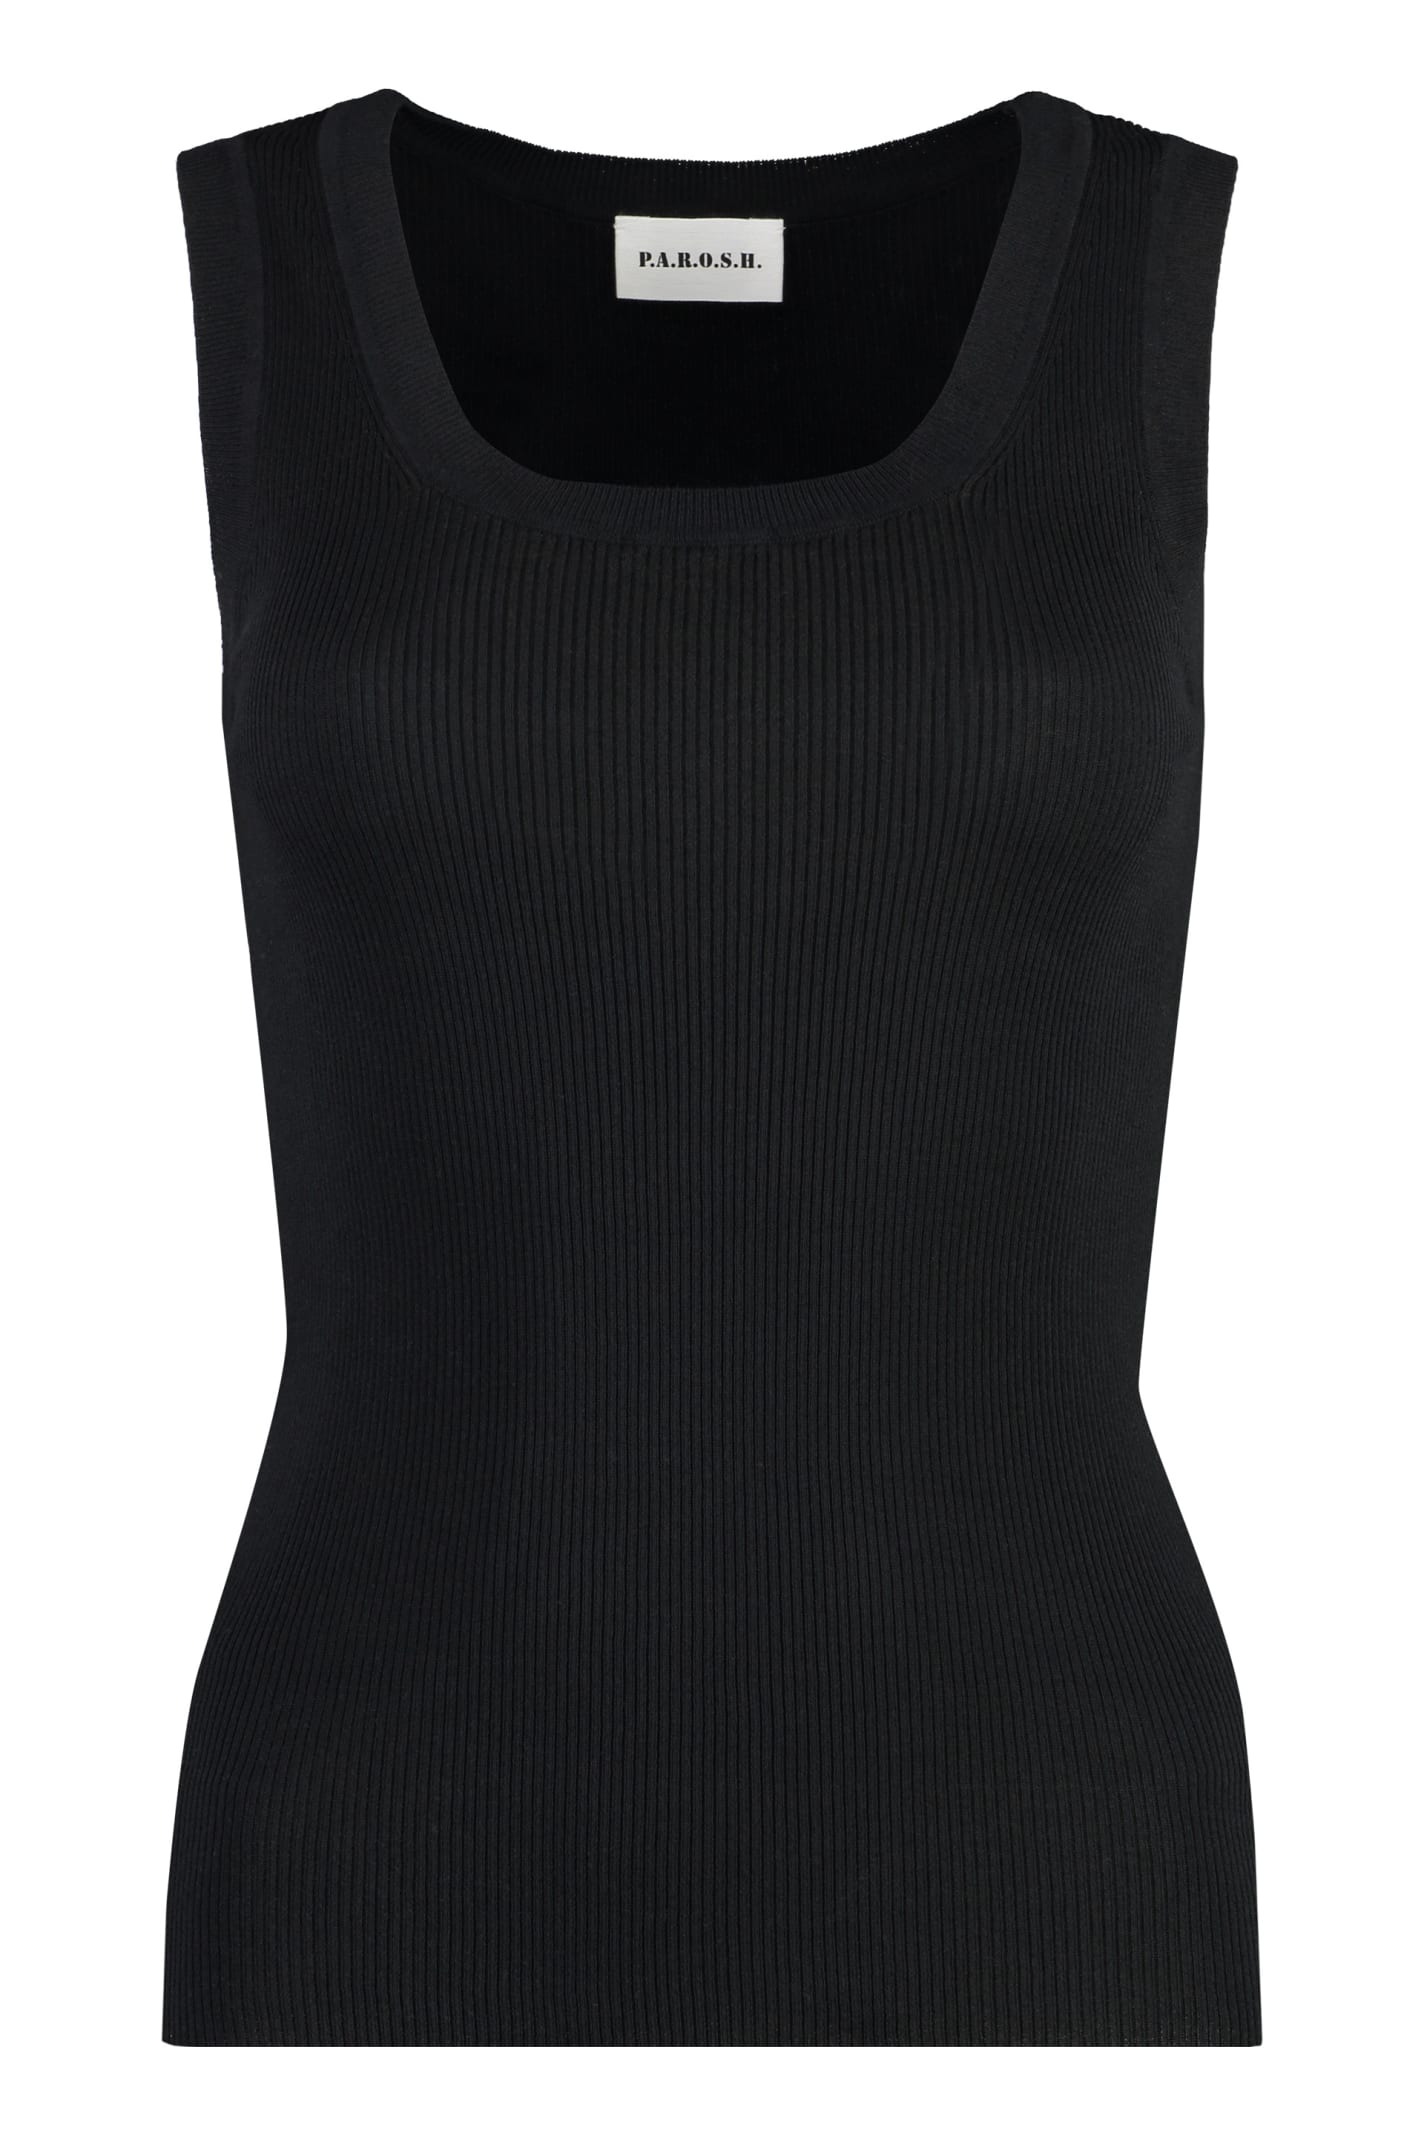 Shop P.a.r.o.s.h Ribbed Tank Top In Black